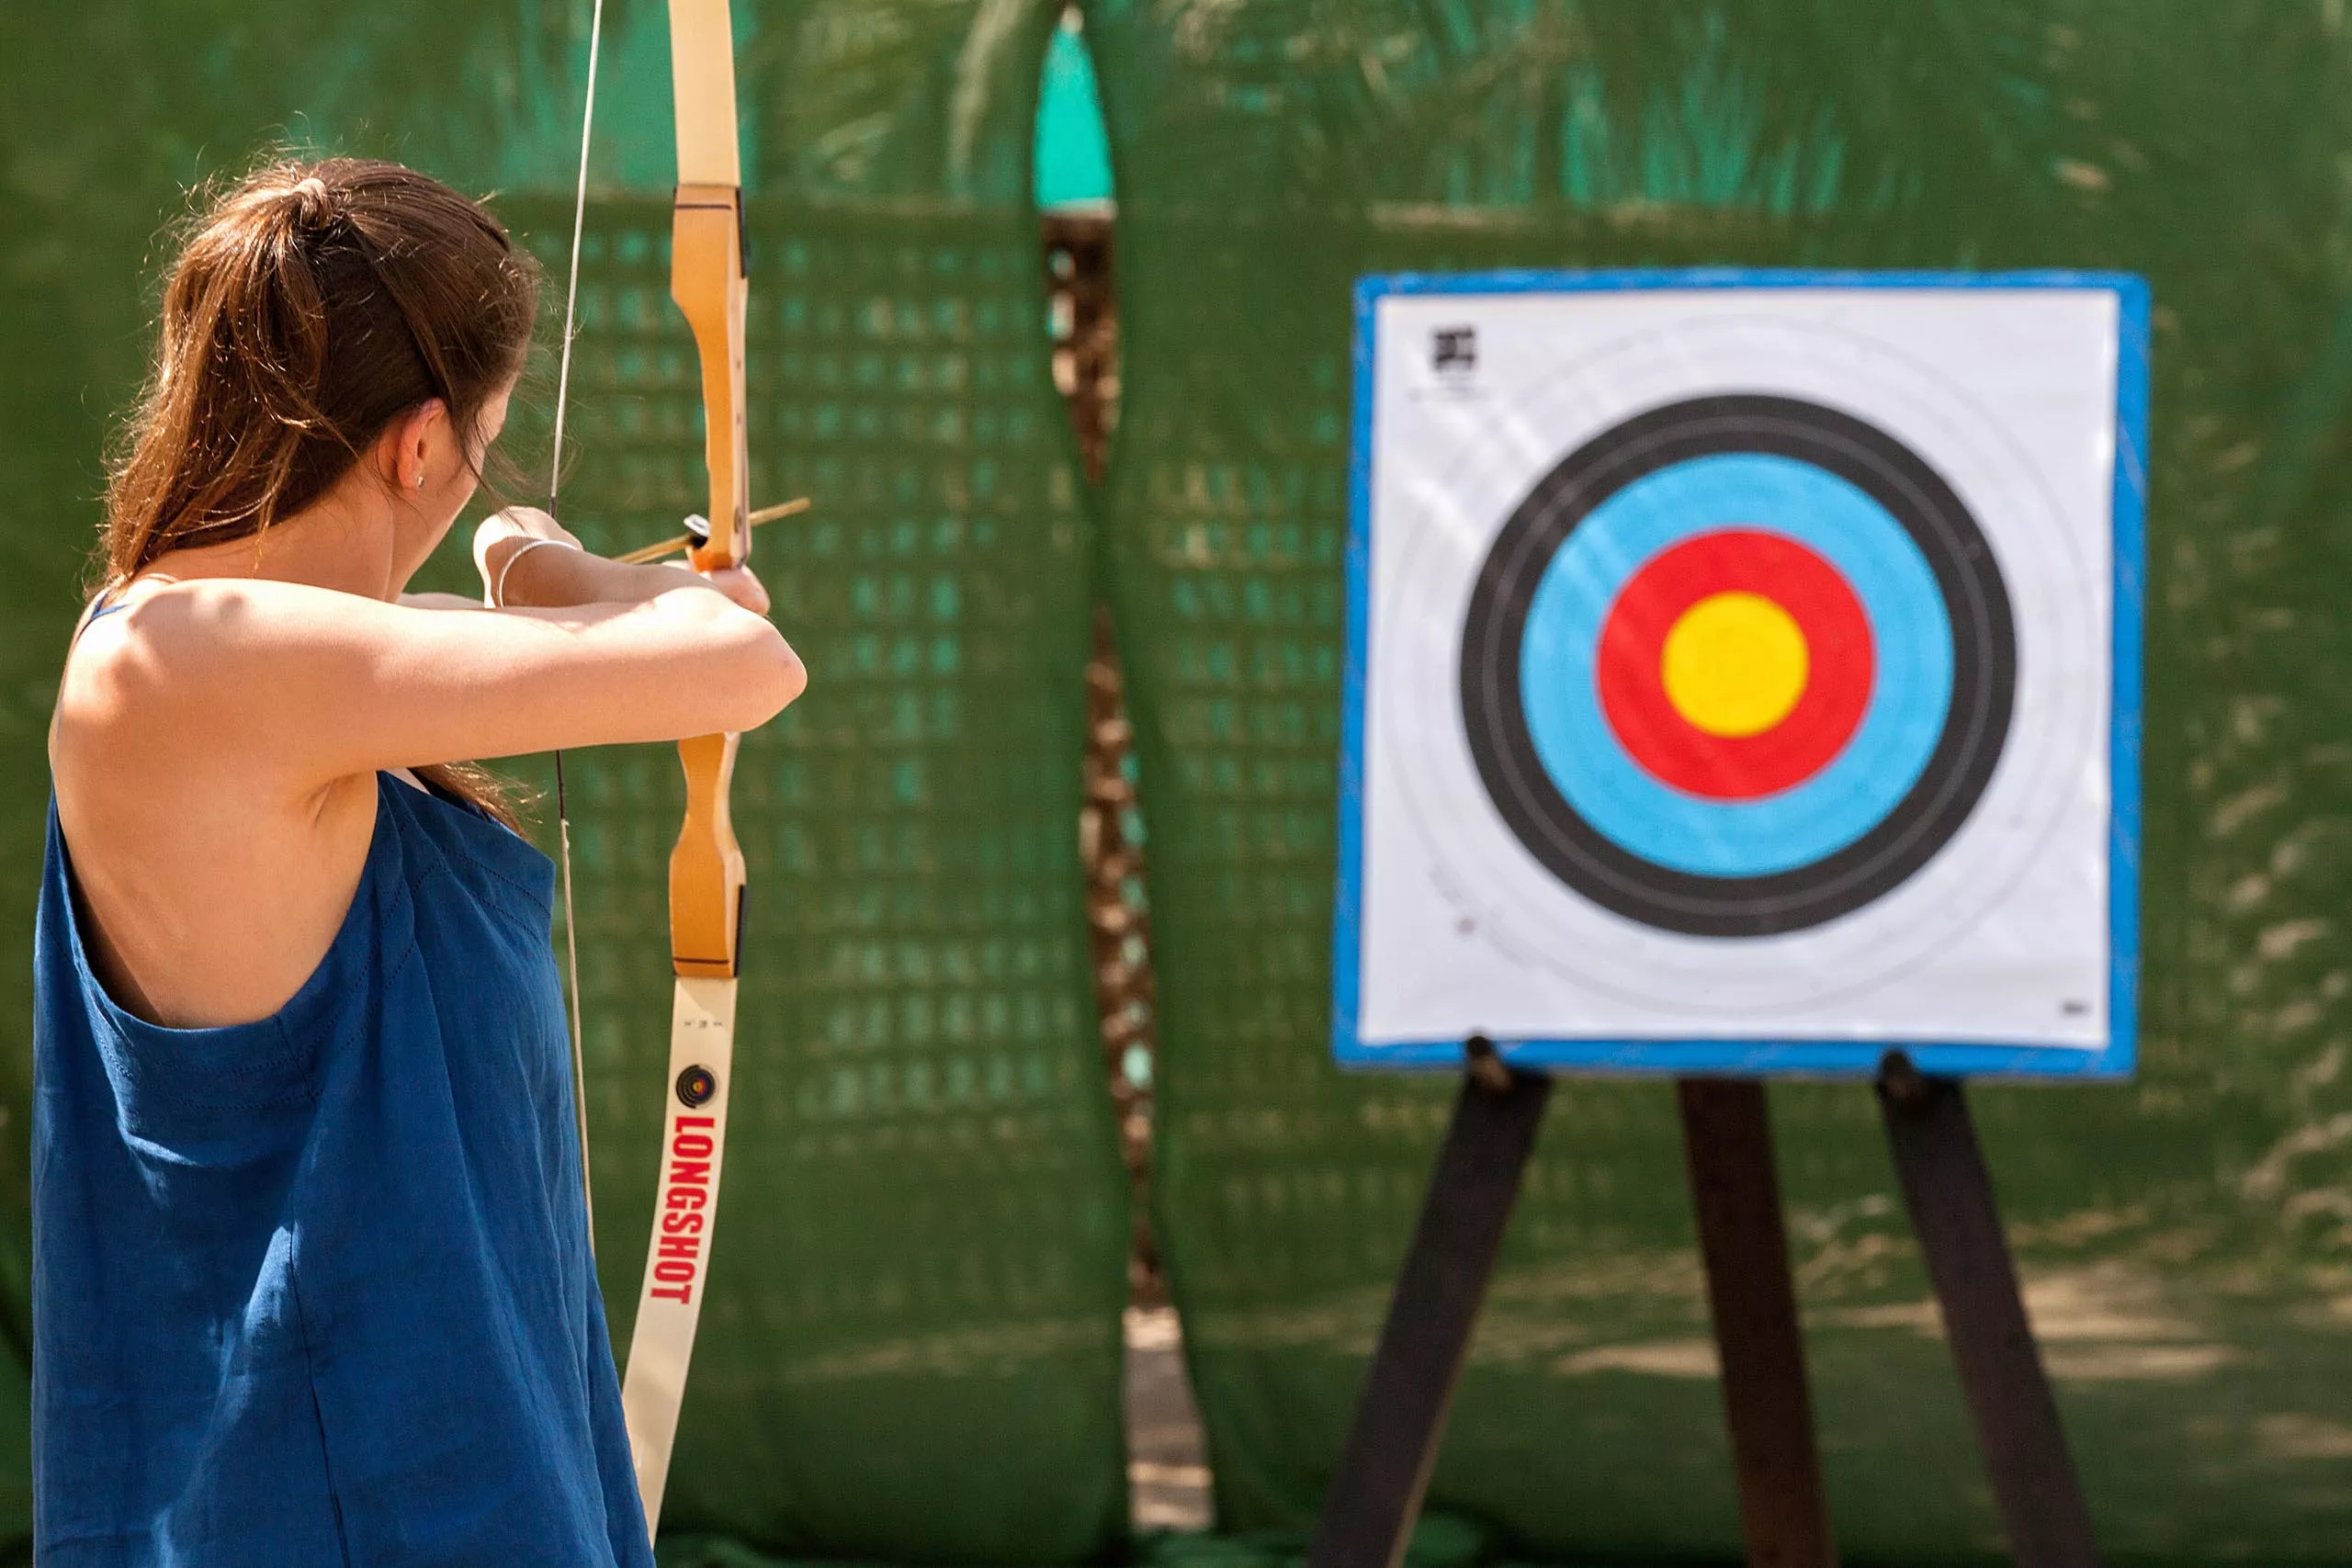 Bows And Arrows in Oman, Middle East | Archery - Rated 0.8